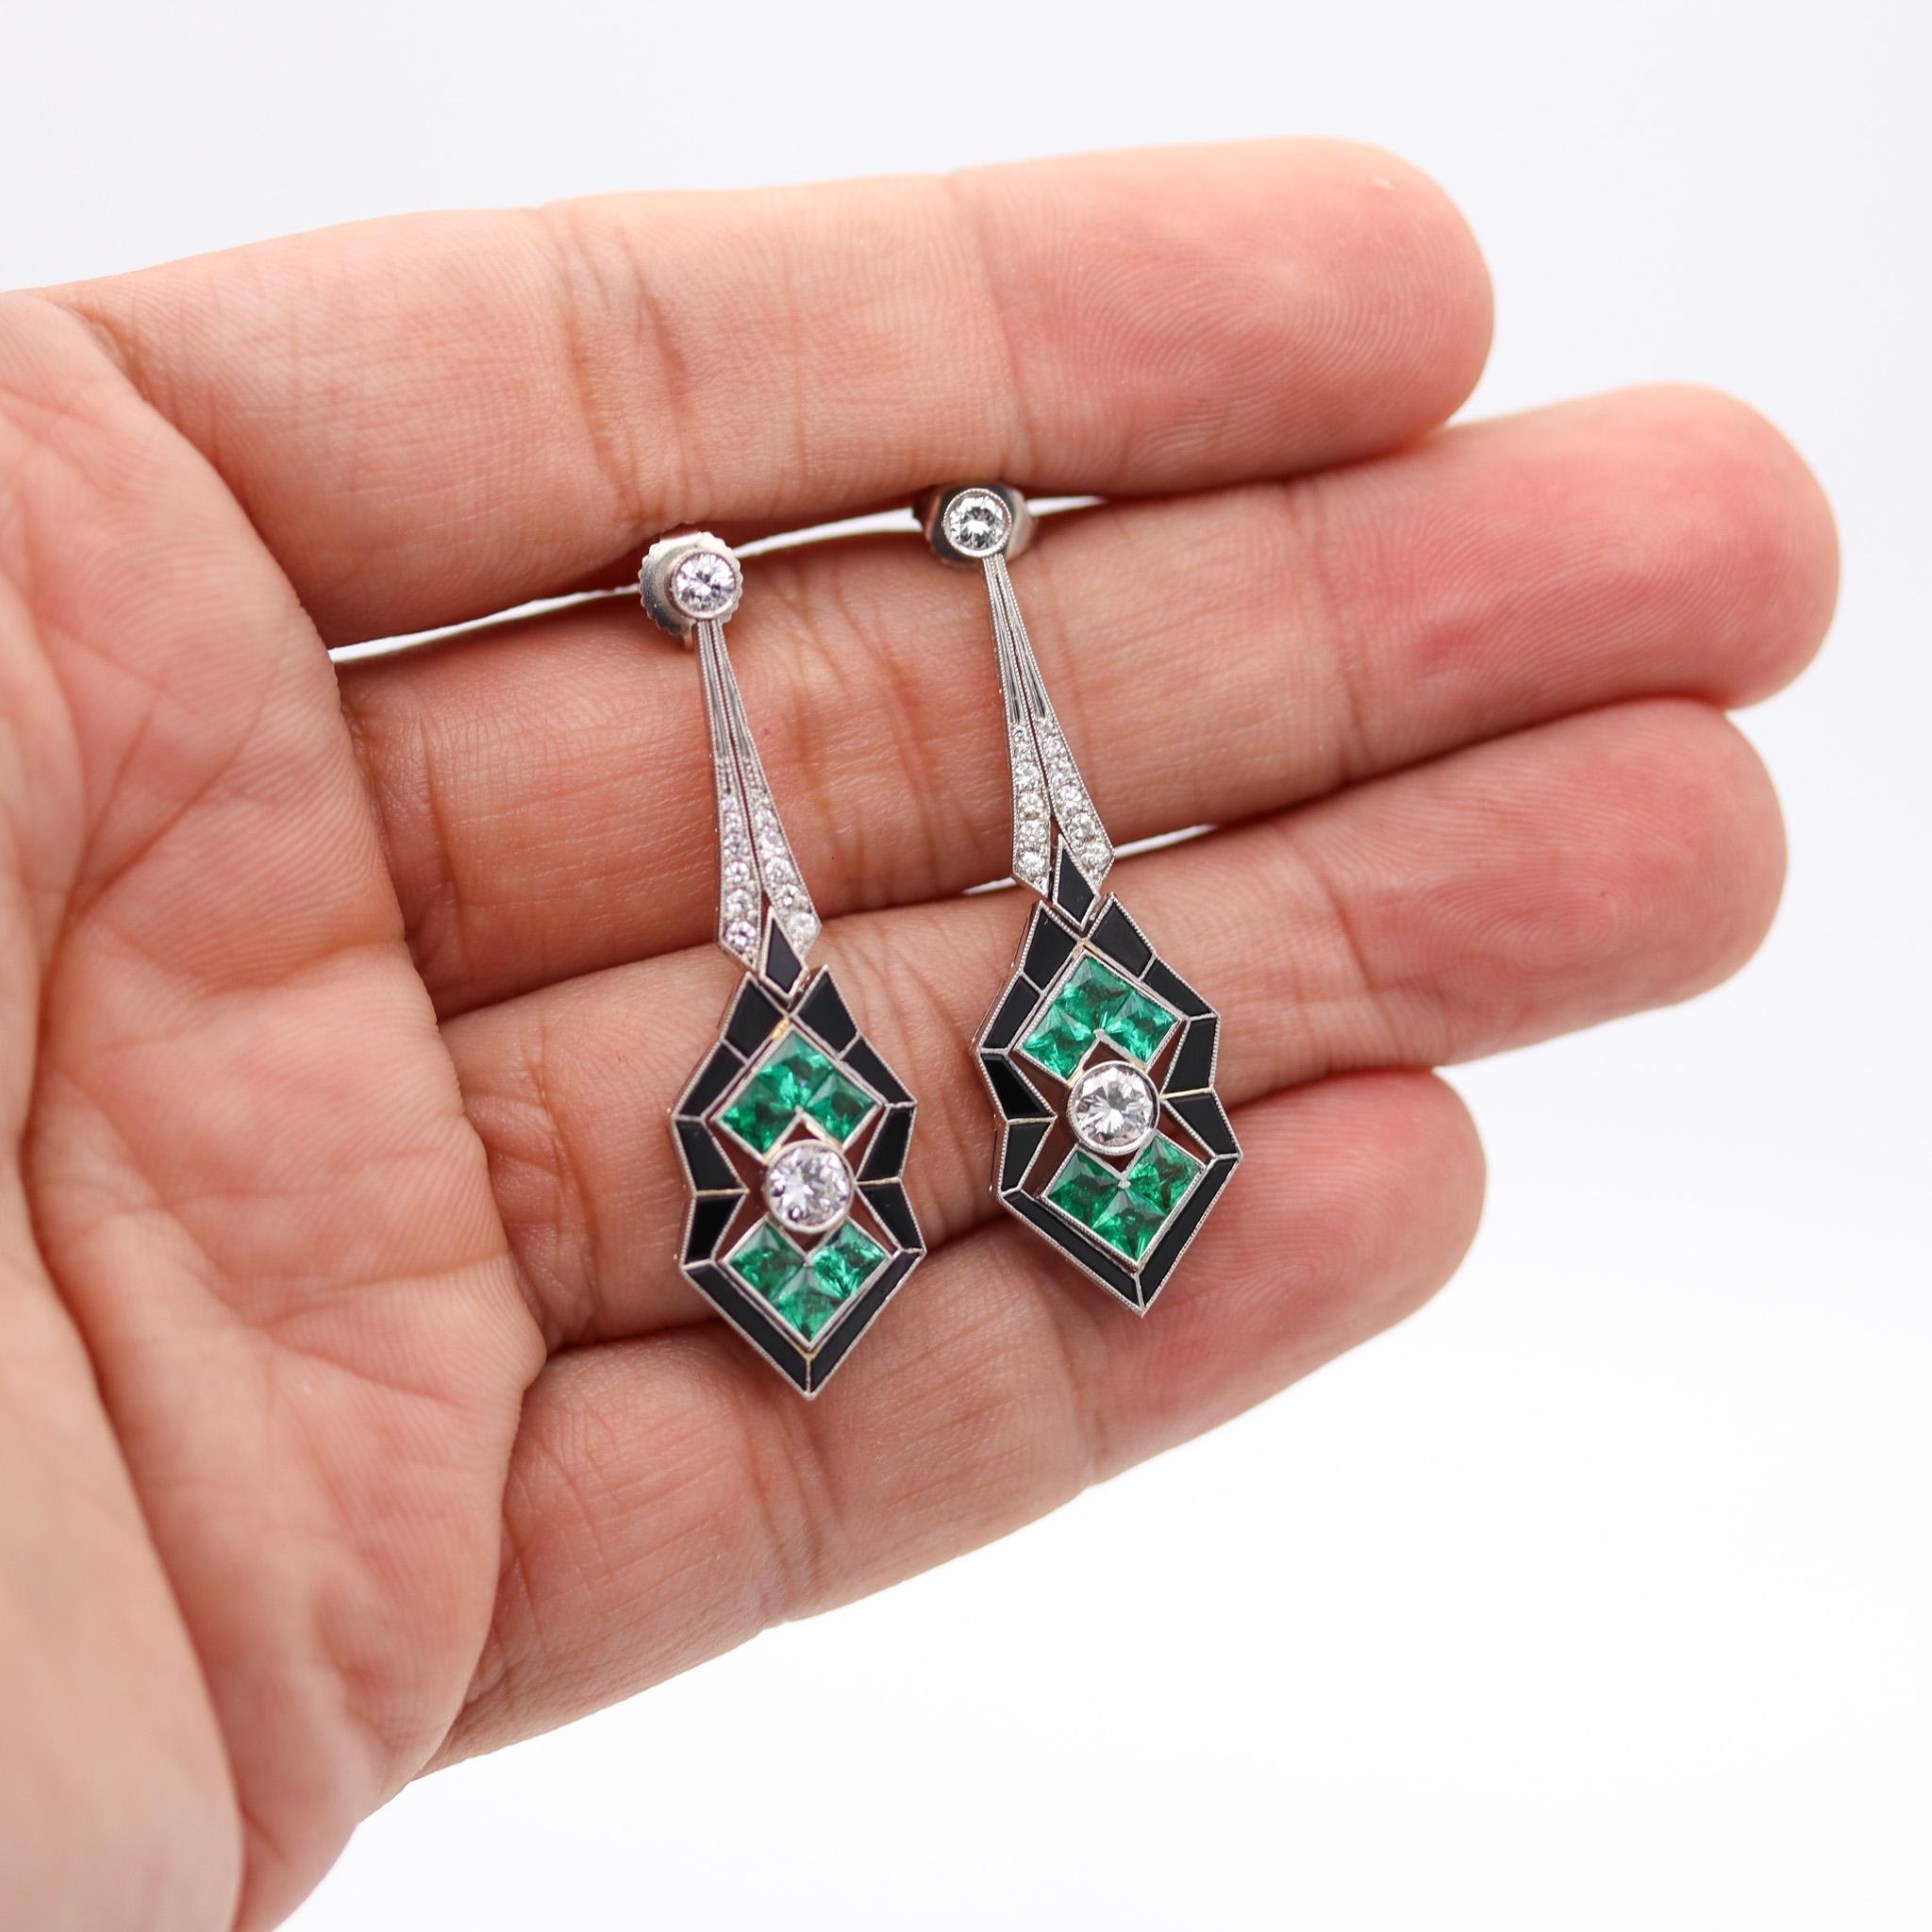 Art Deco 1930 Dangle Earrings In Platinum With 10.52 Ctw In Diamonds & Emeralds For Sale 3